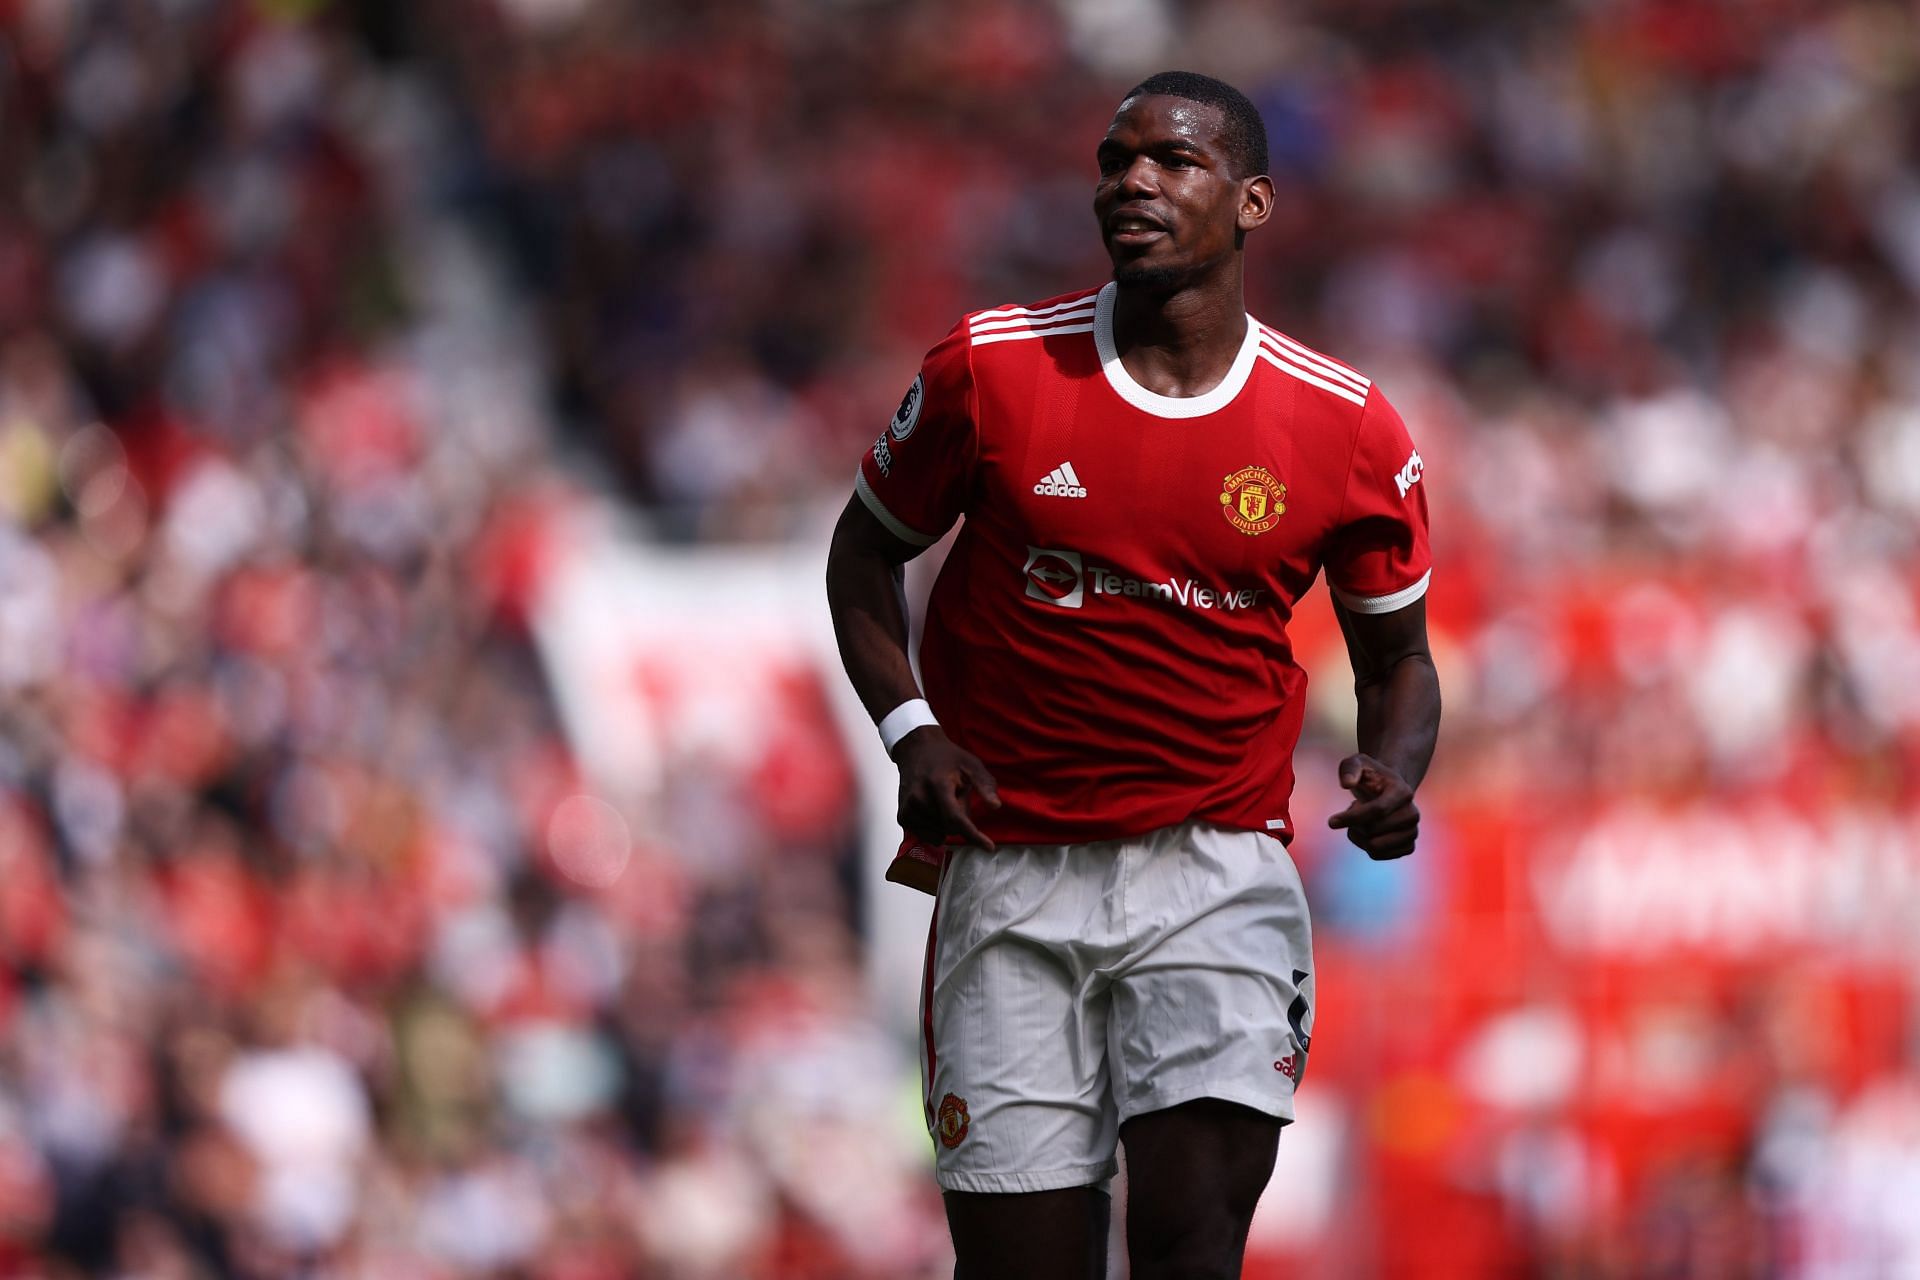 Paul Pogba will leave Manchester United this summer